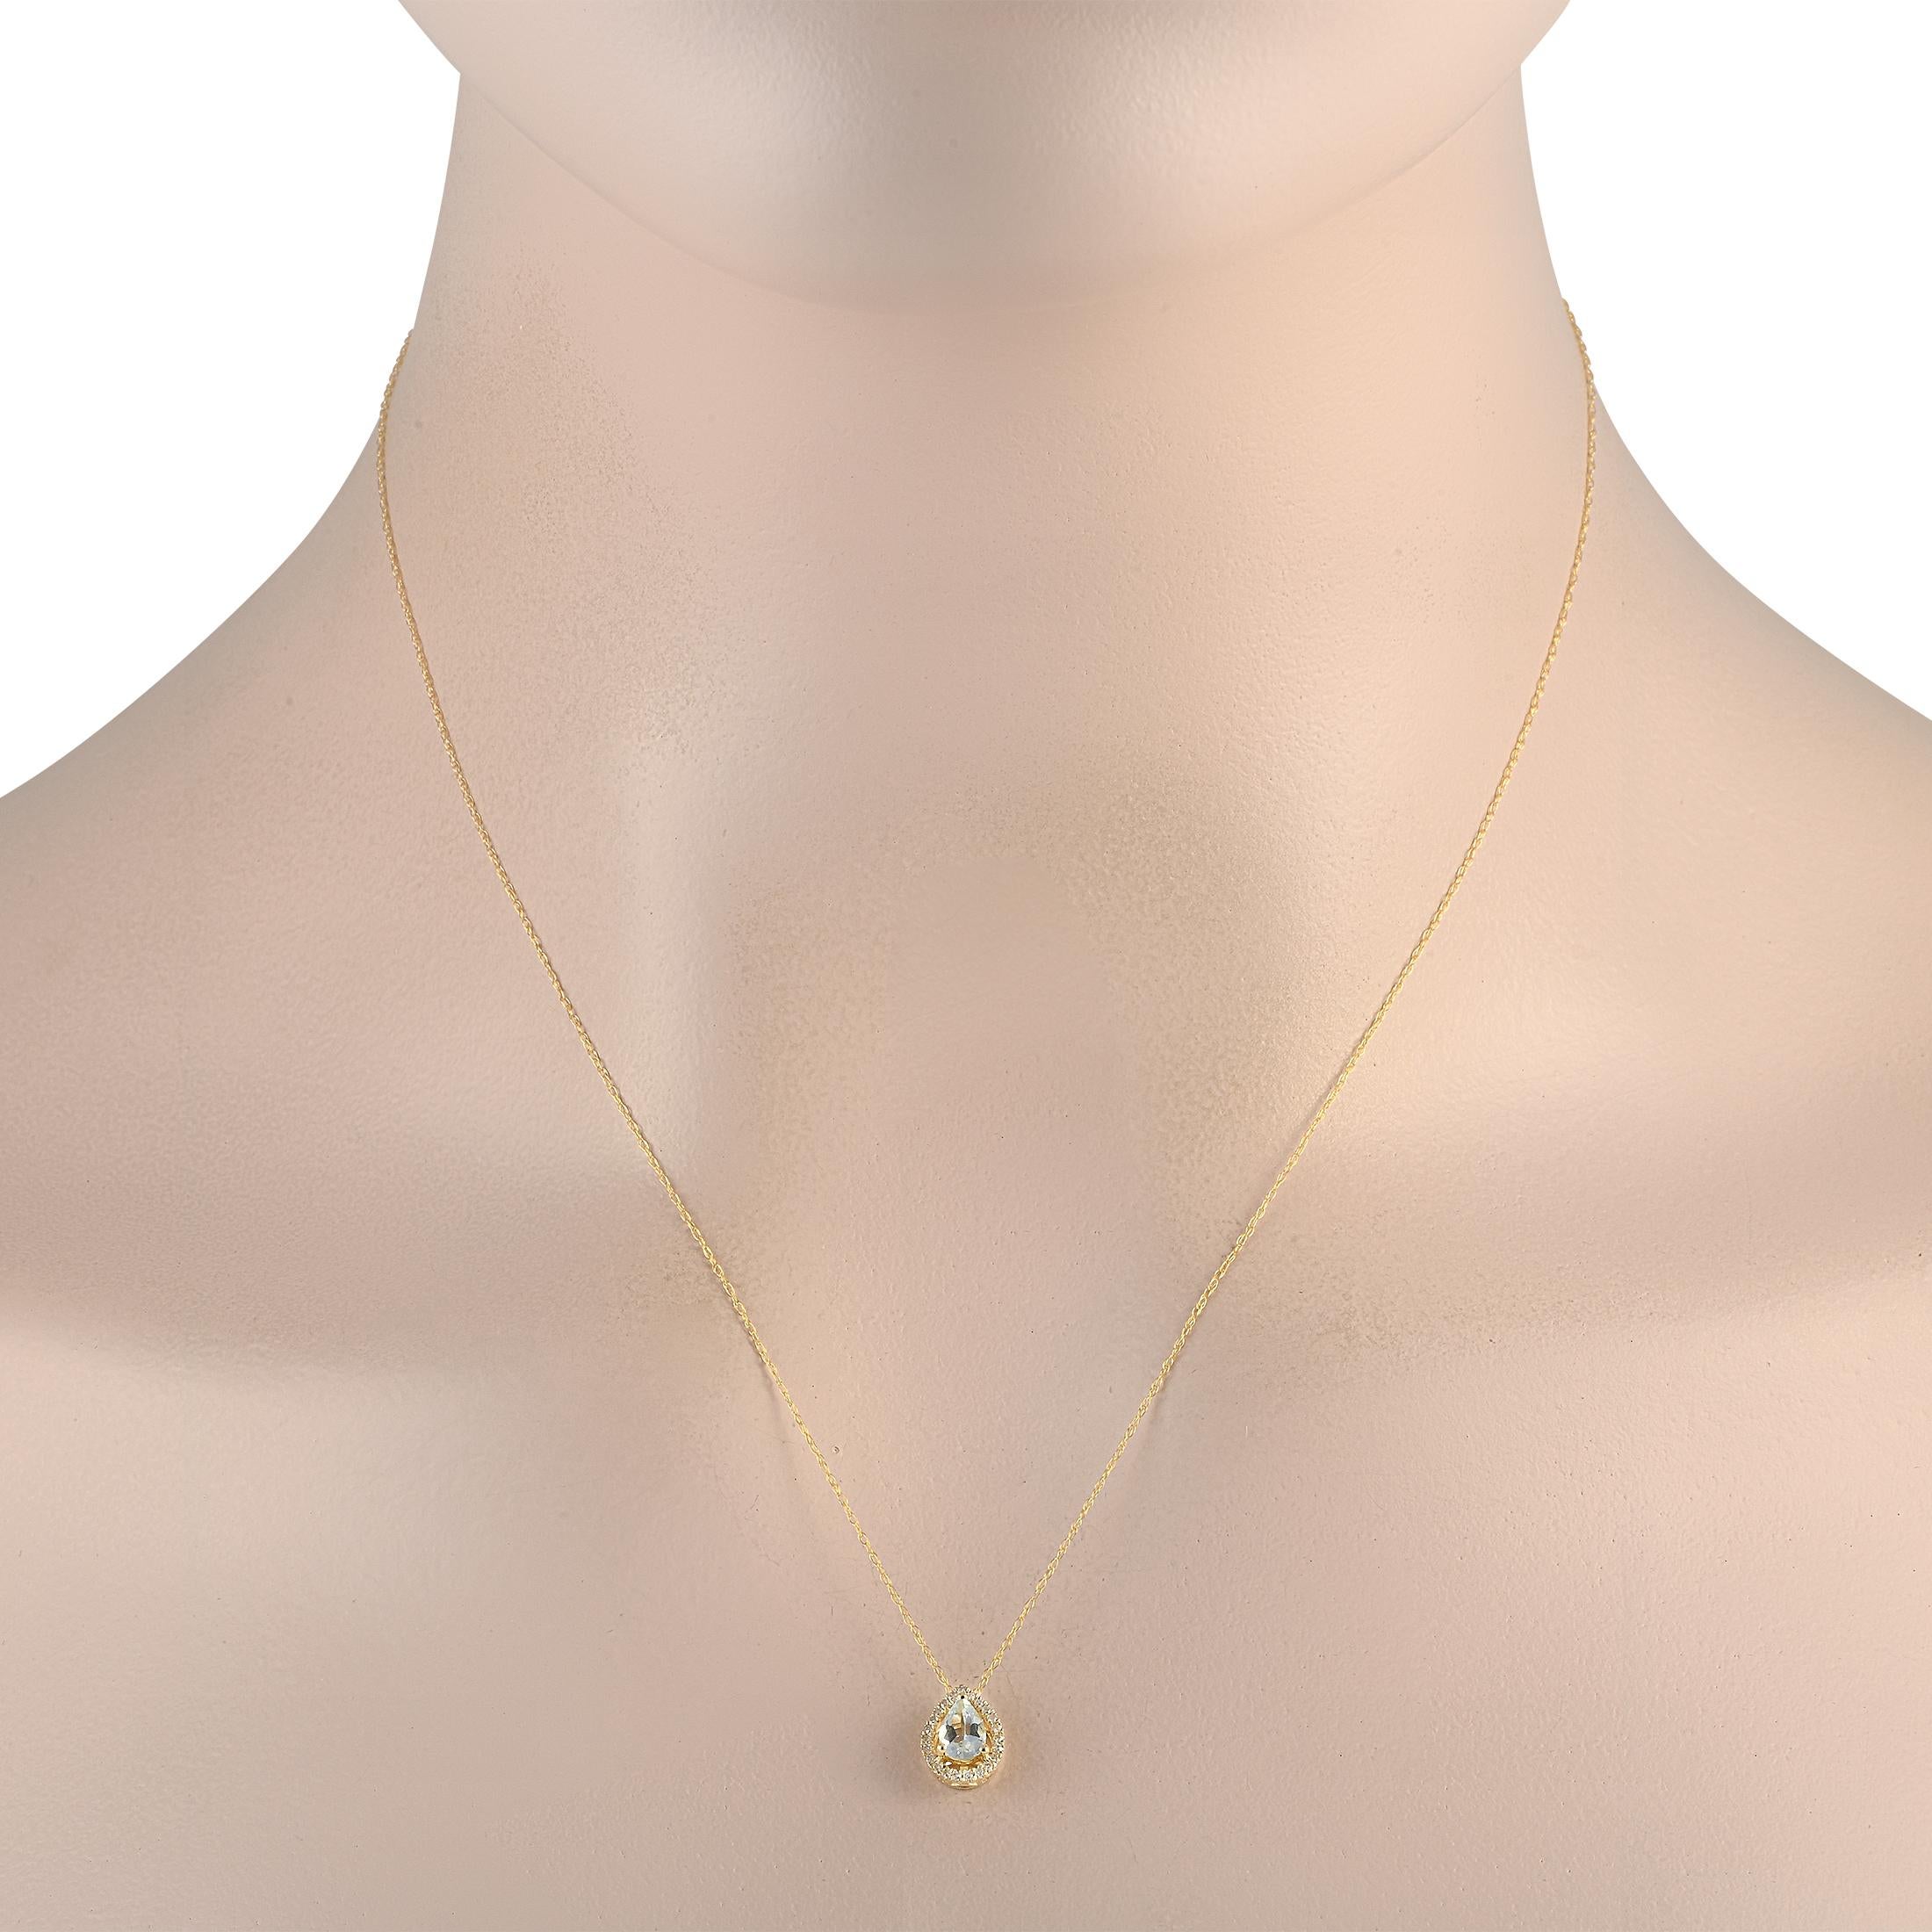 You'll find yourself reaching for this beauty daily. This LB Exclusive necklace features a delicate double-cable chain necklace holding a pear-shaped pendant with a faceted aquamarine center, haloed by petite diamonds. The glittering pendant